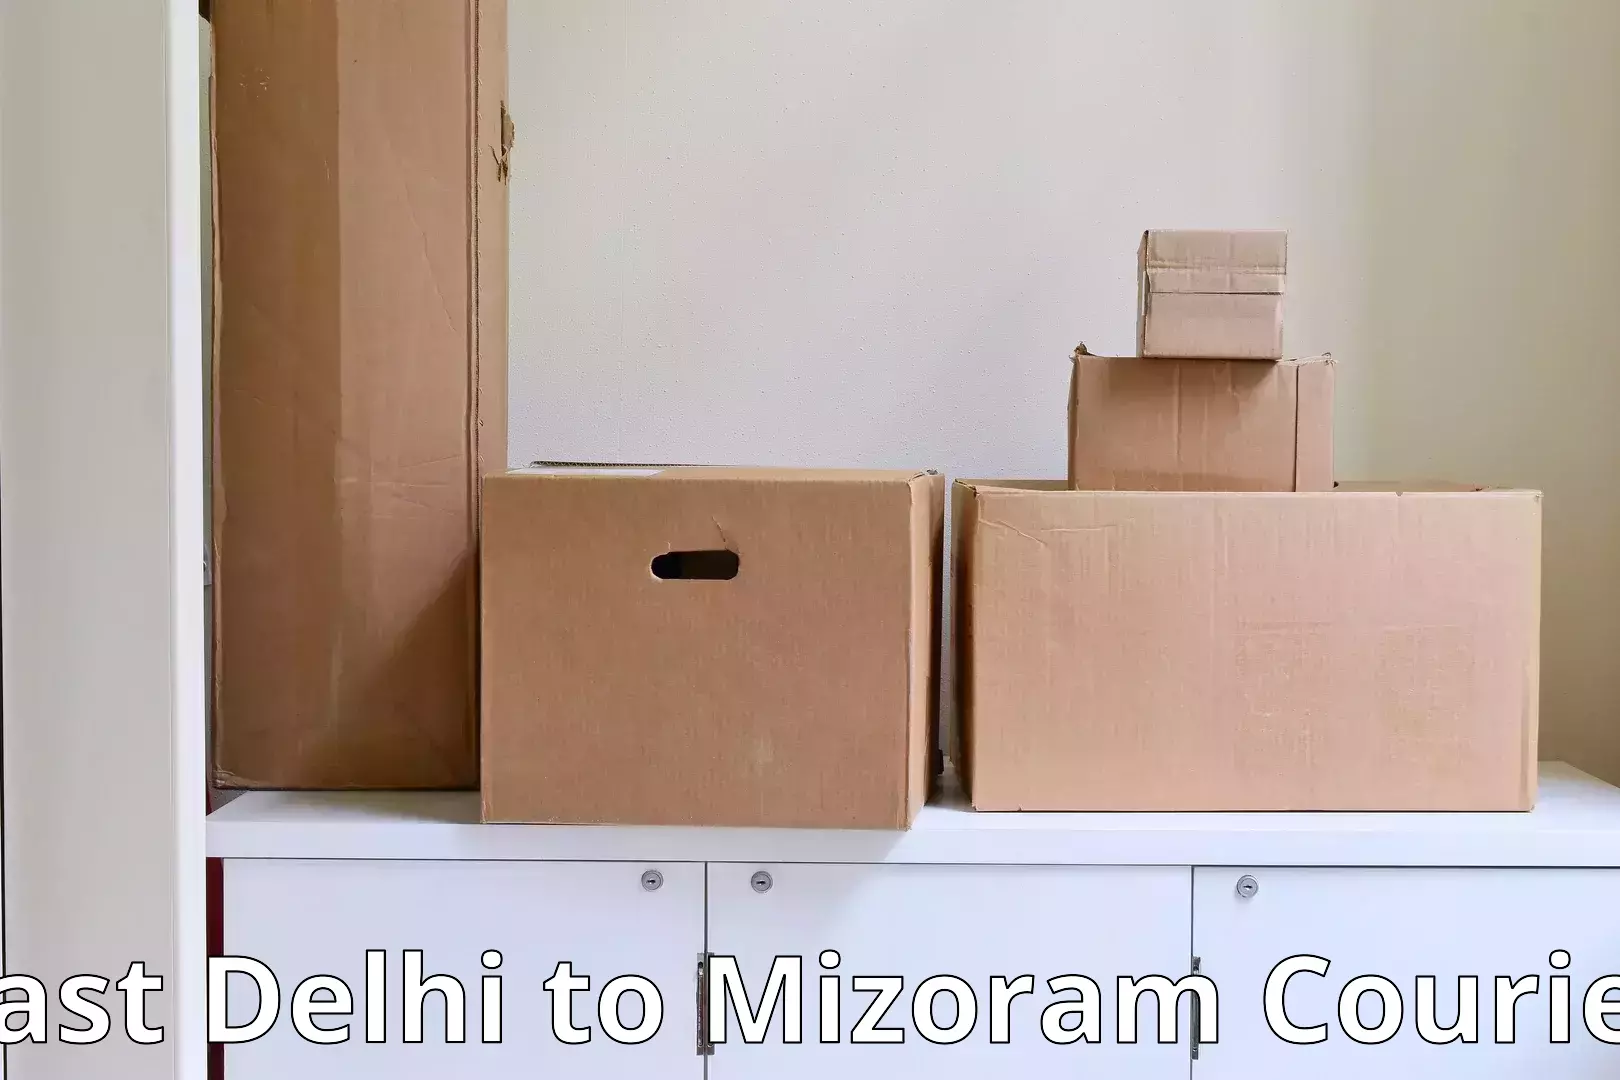 Quality relocation services in East Delhi to Mizoram